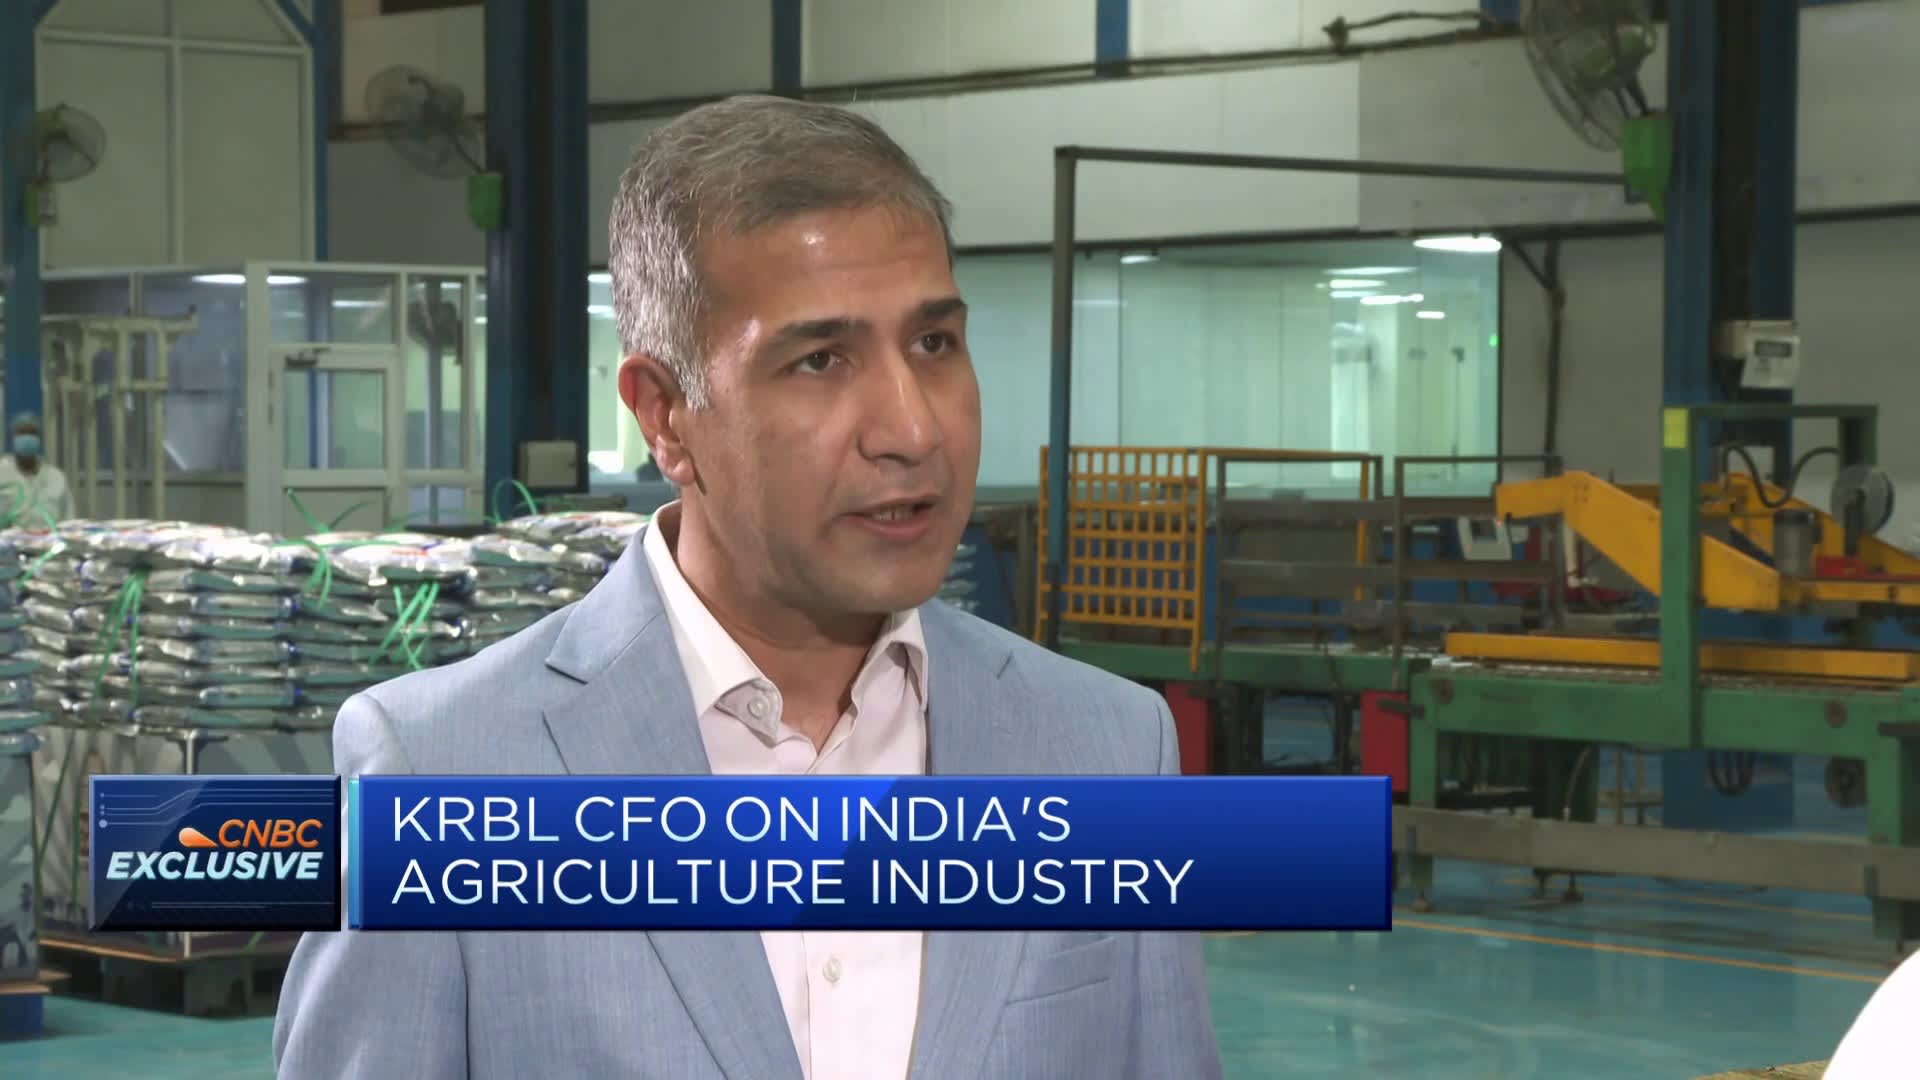 KRBL discusses strategy as share of agriculture in India GDP declines [Video]